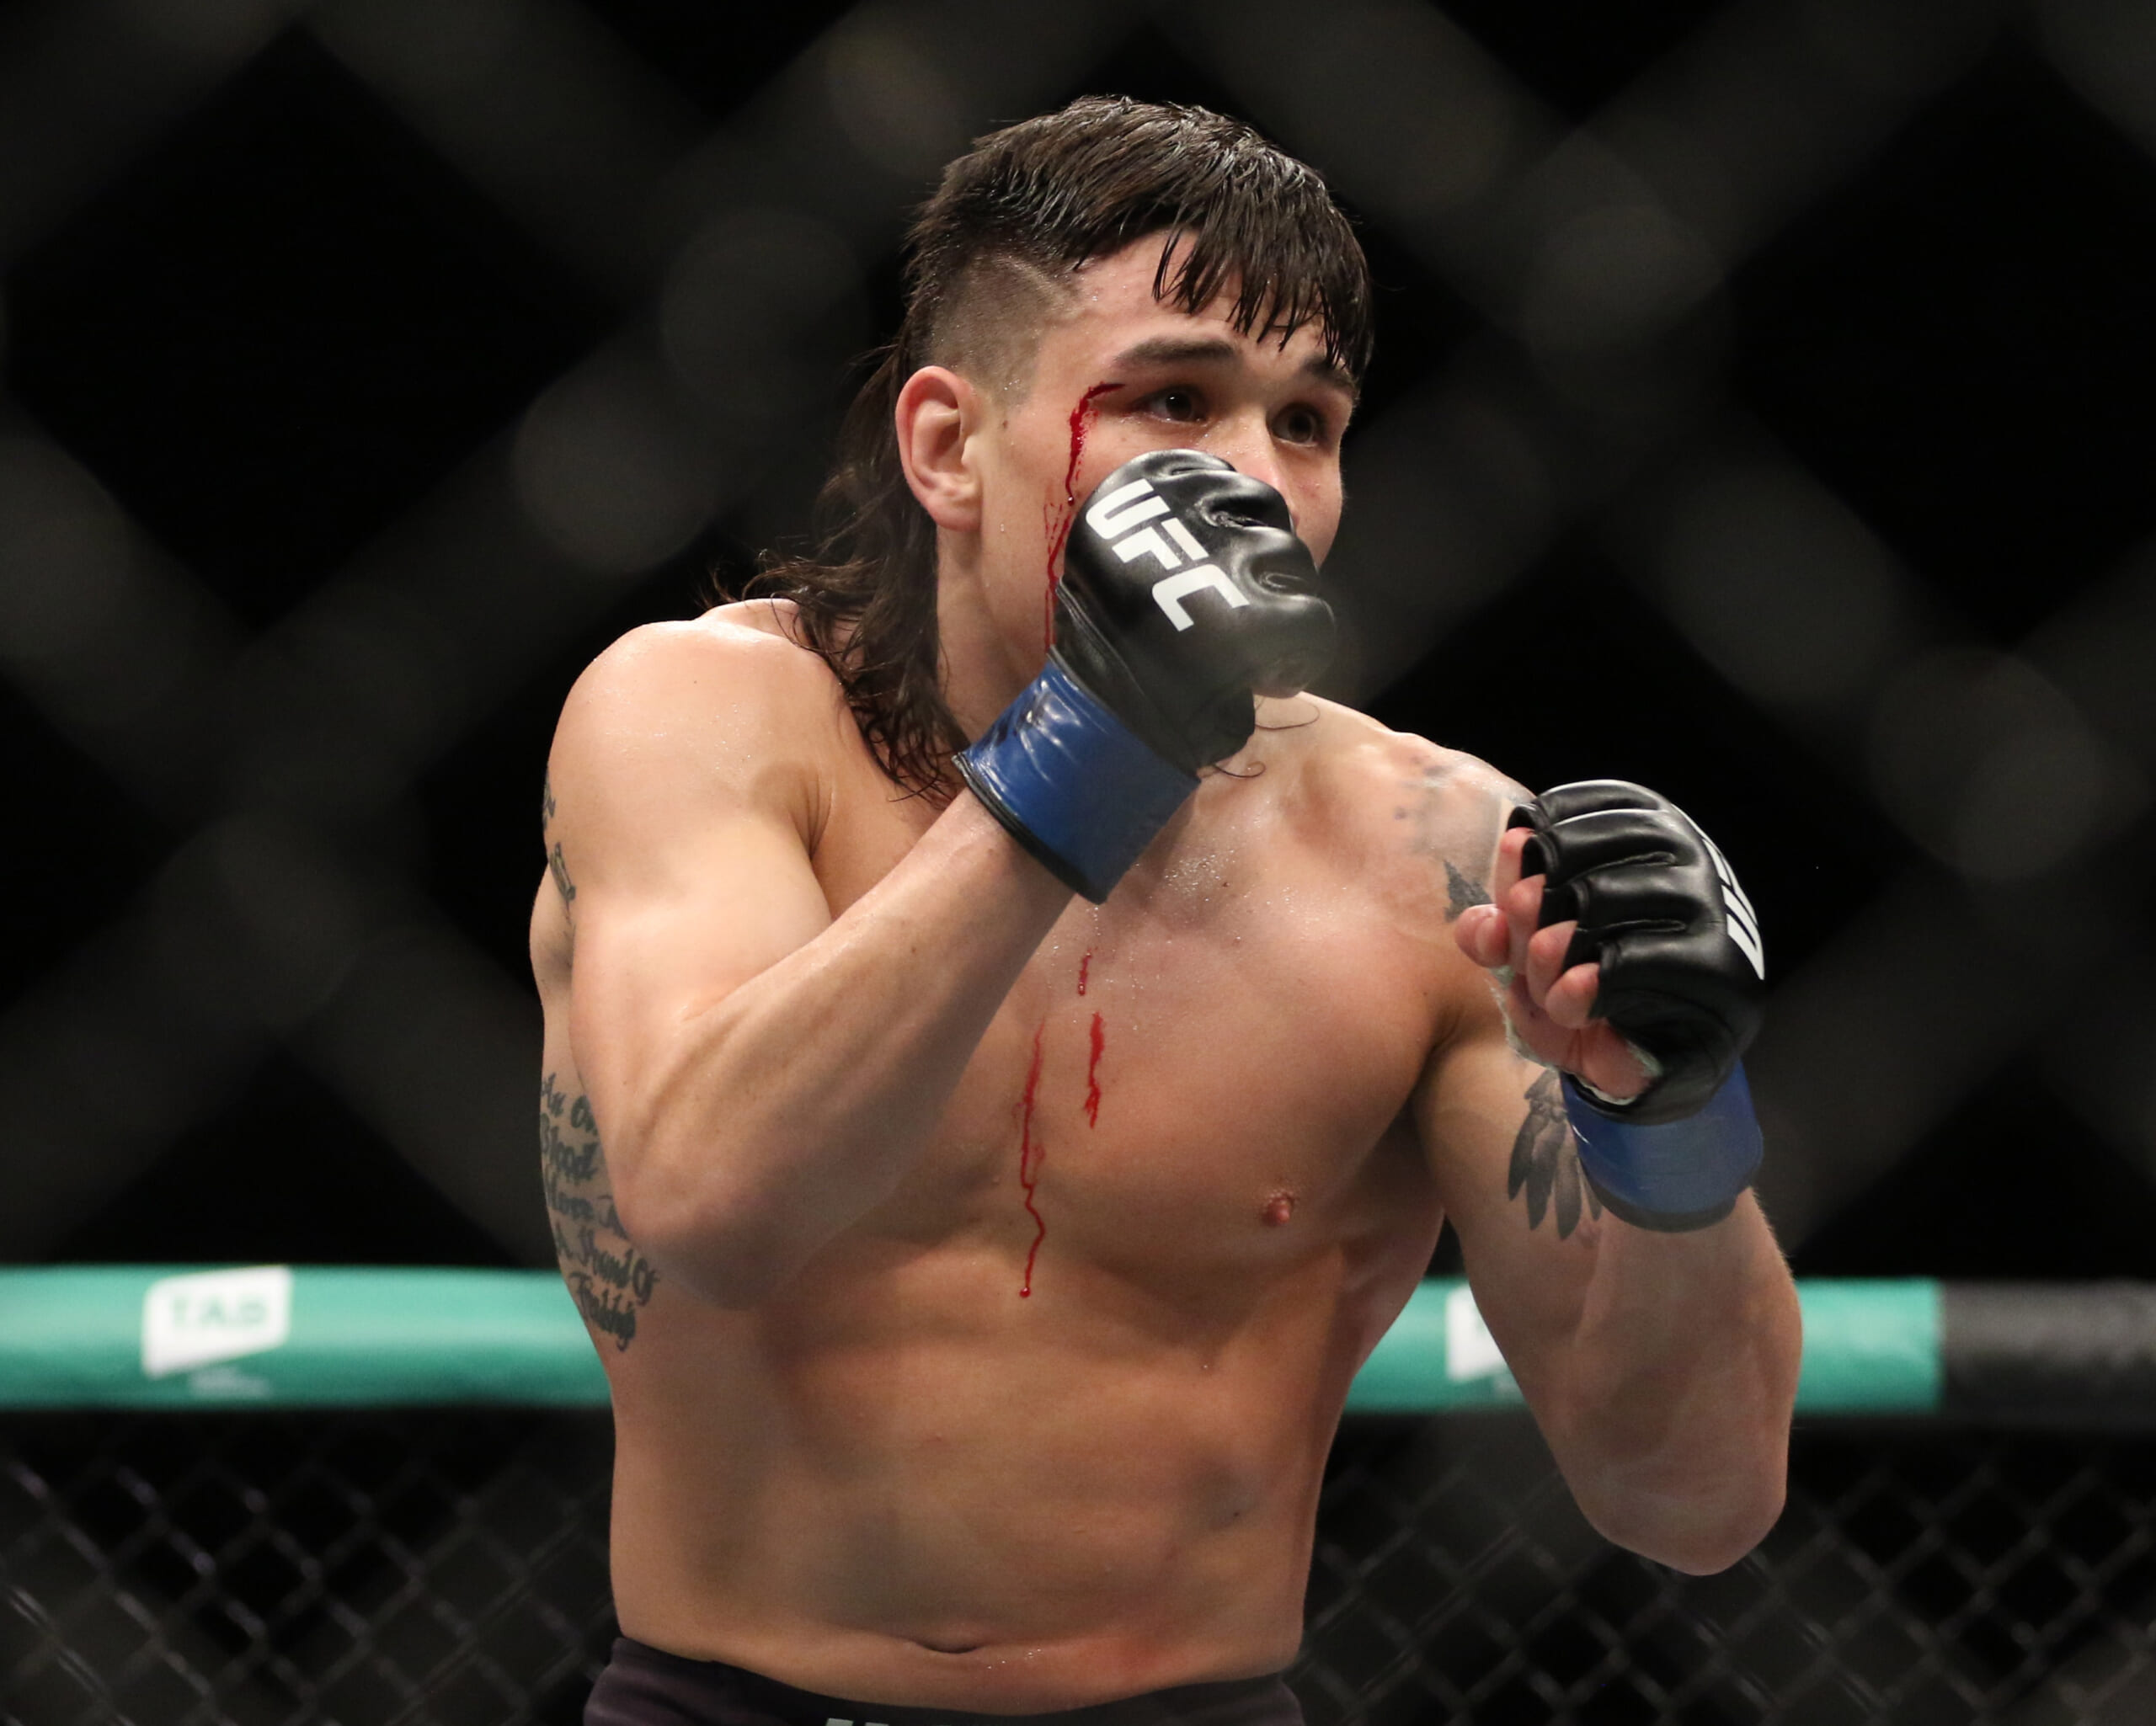 After a tough loss at UFC Vegas 72, what’s next for Ricky Simon?